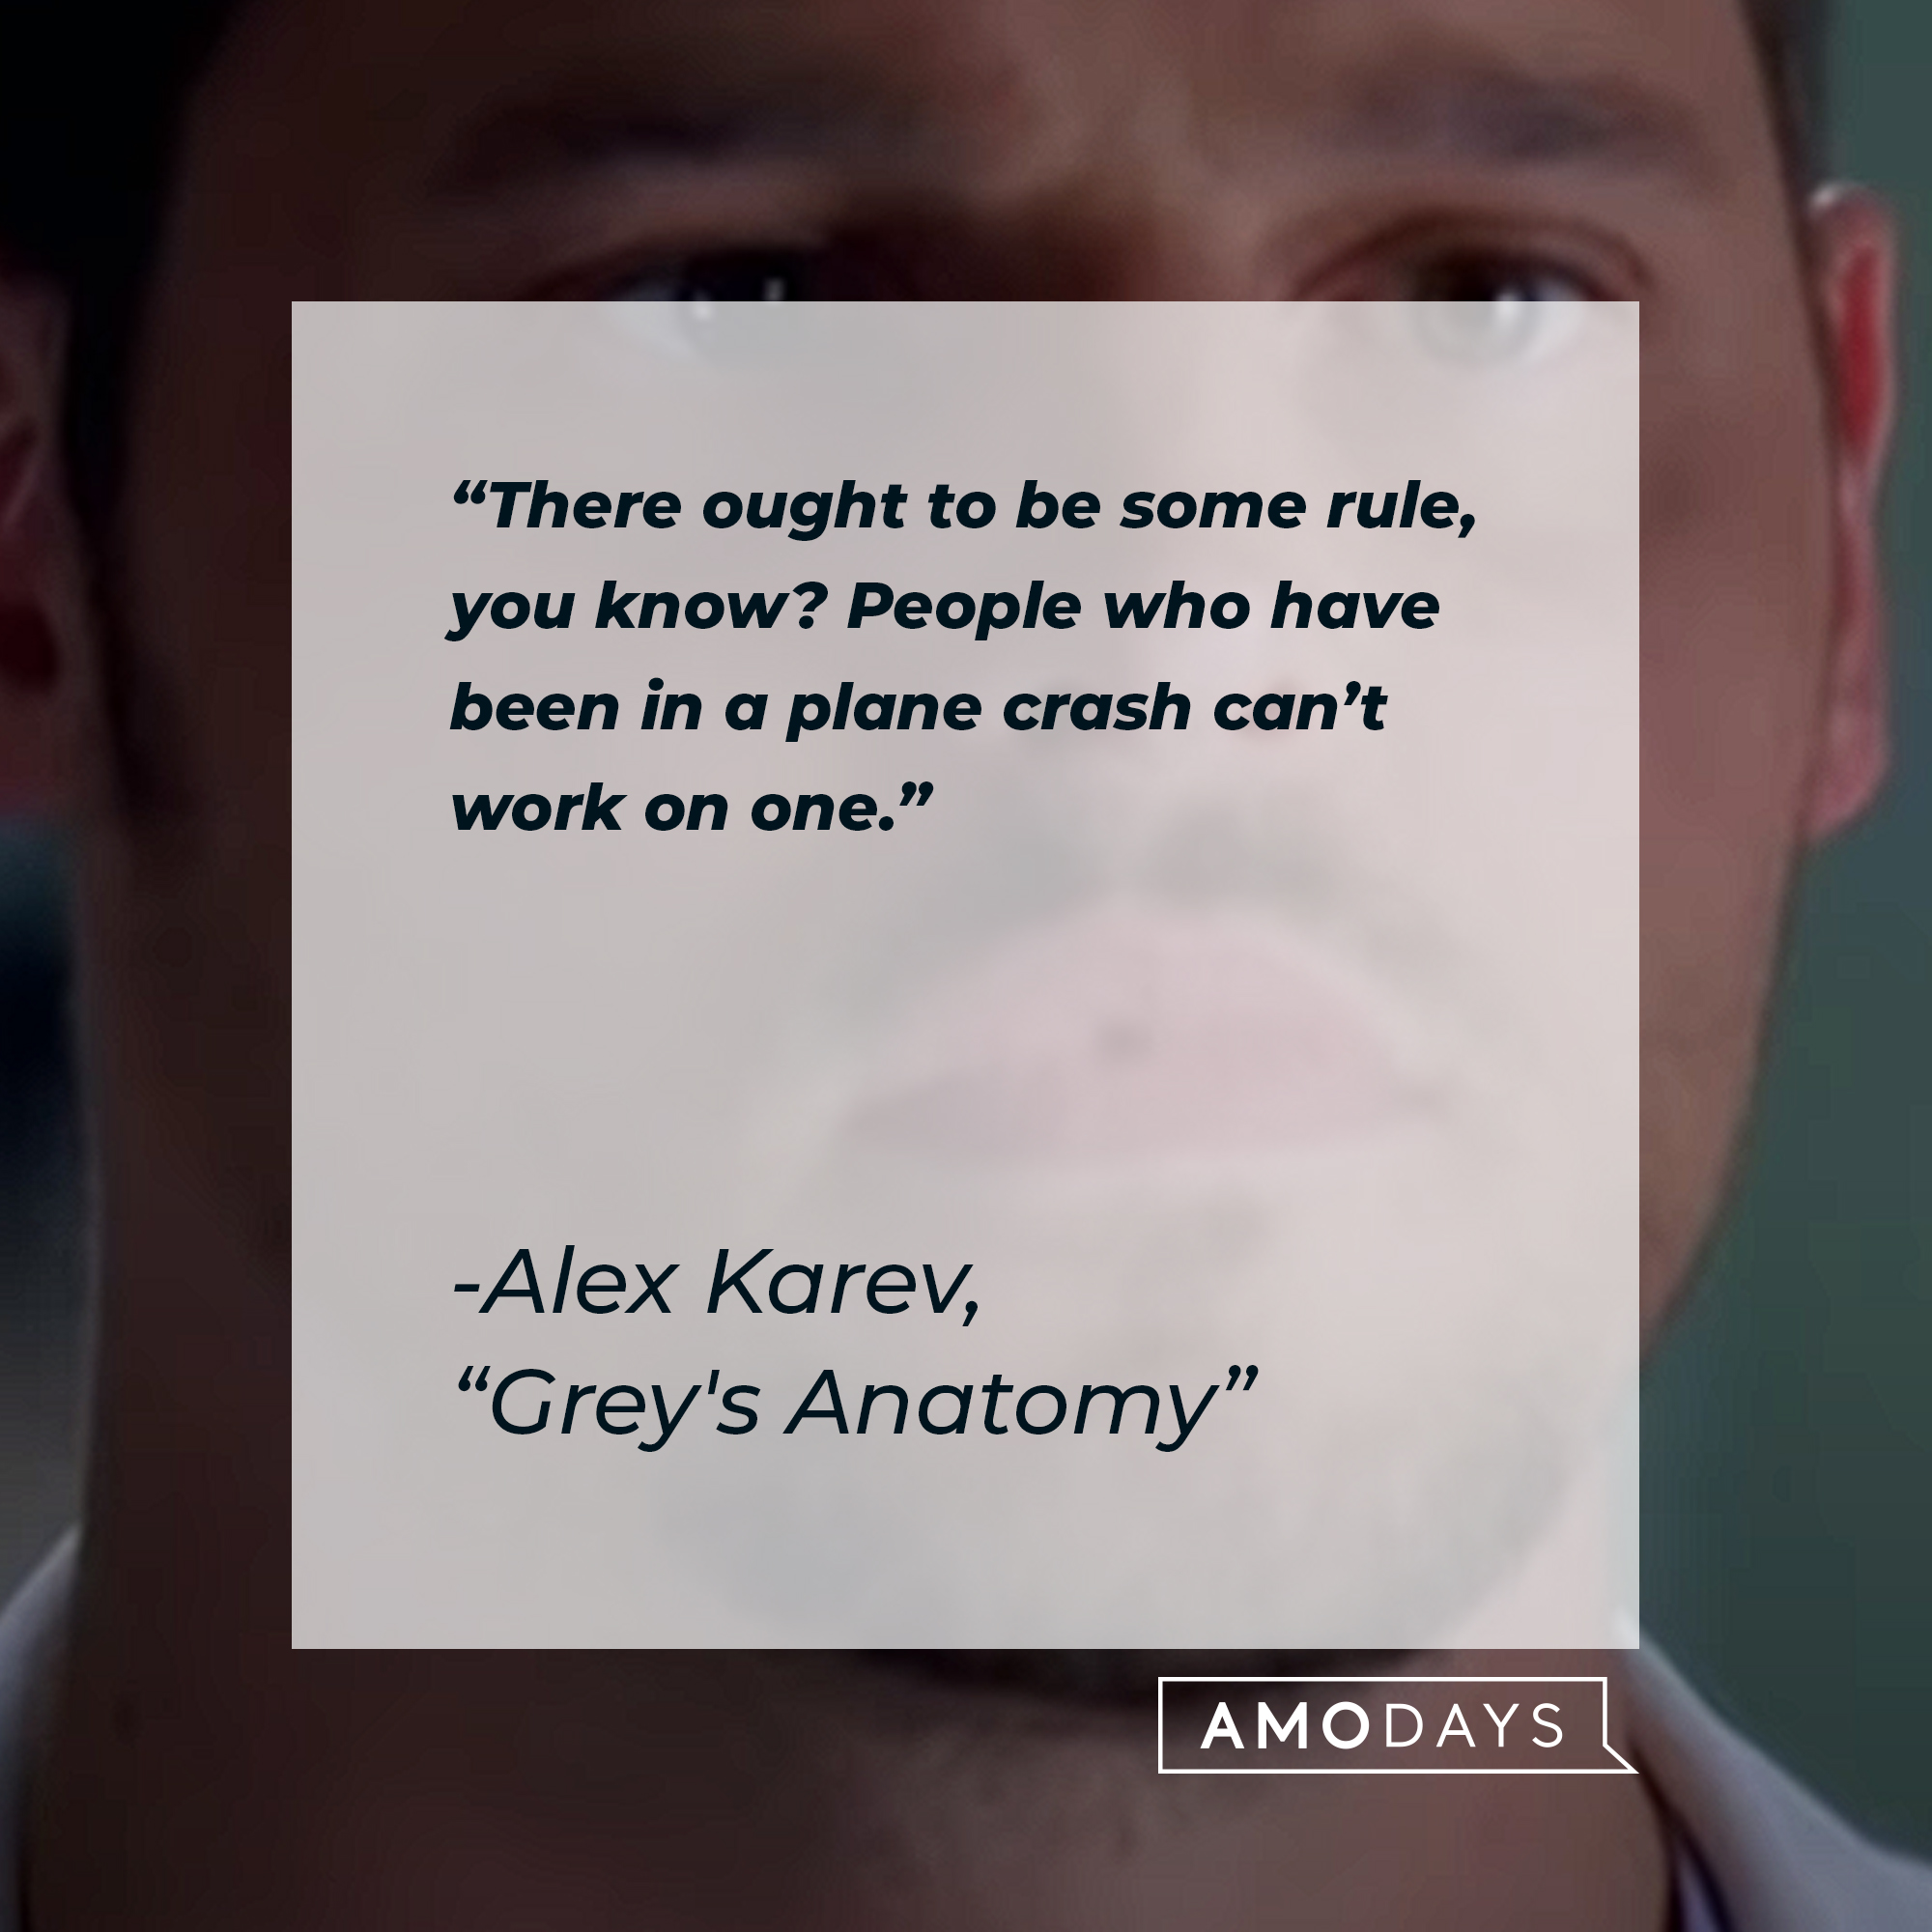 Alex Karev’s quote from “Grey’s Anatomy”: “There ought to be some rule, you know? People who have been in a plane crash can’t work on one.” | Source: youtube.com/ABCNetwork